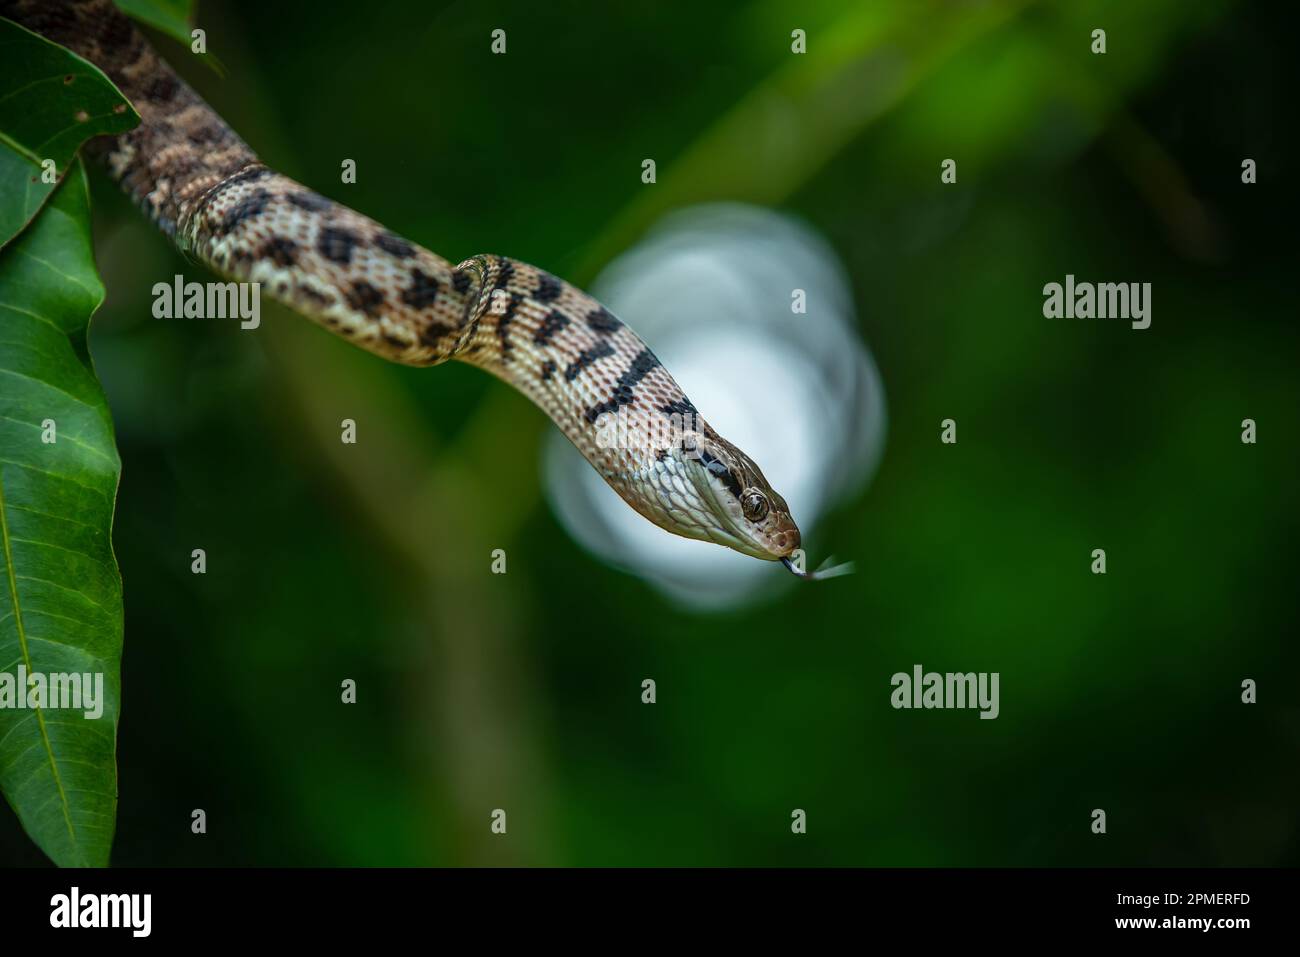 Boiga cynodon,  dog-toothed cat snake Stock Photo